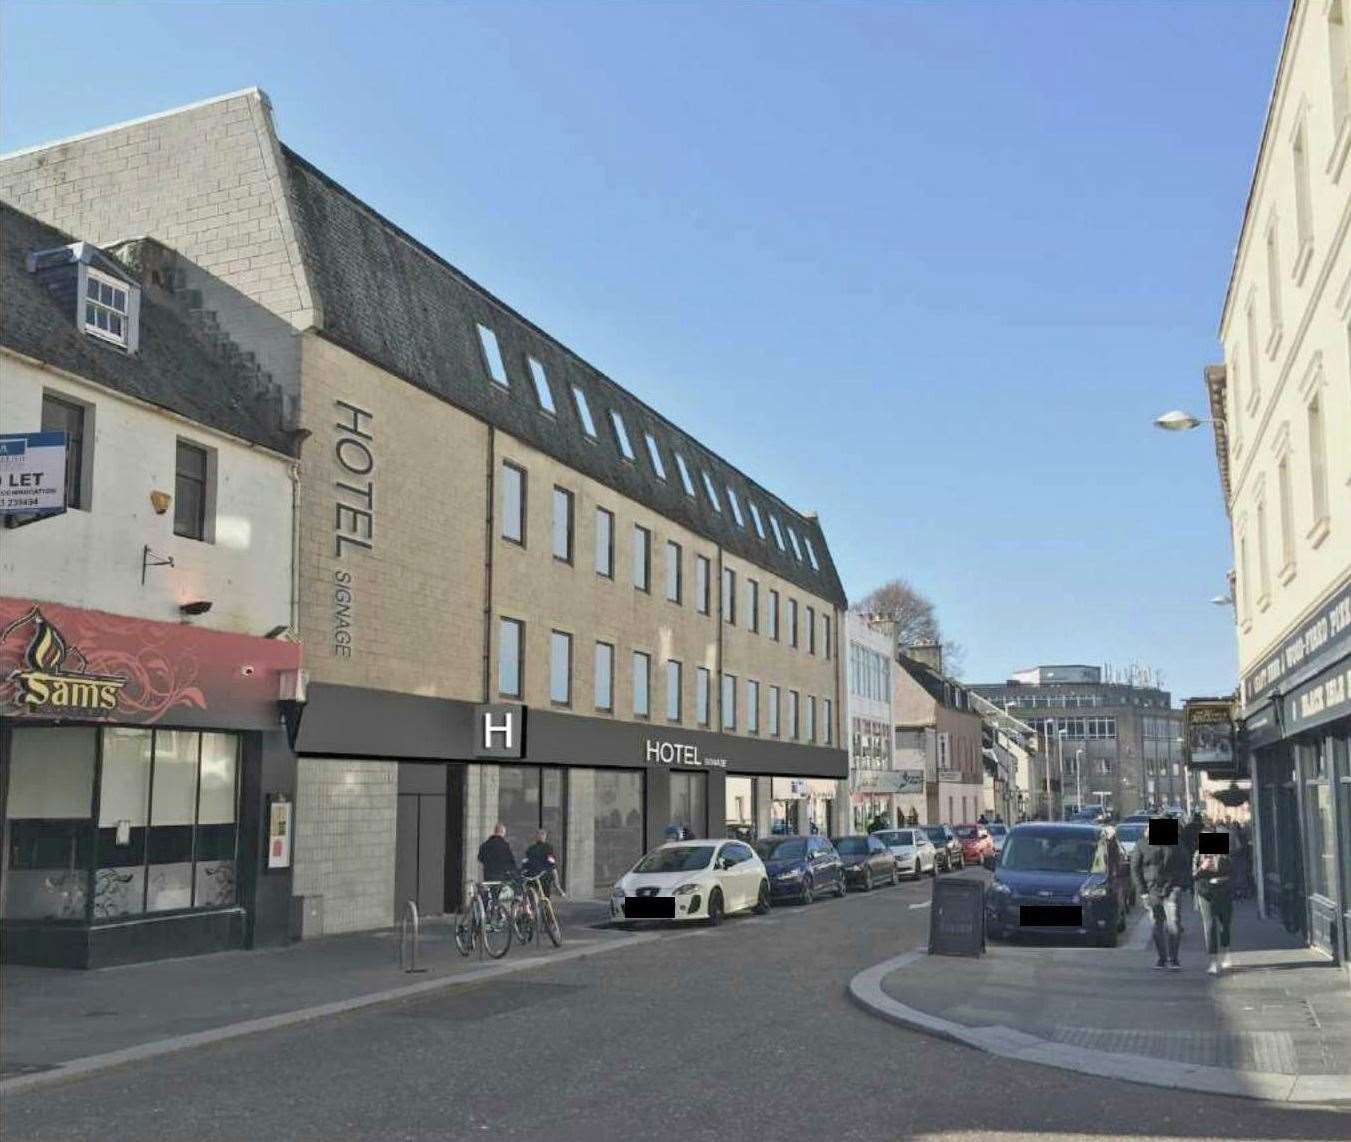 An artist's impression of the proposed hotel in Church Street.